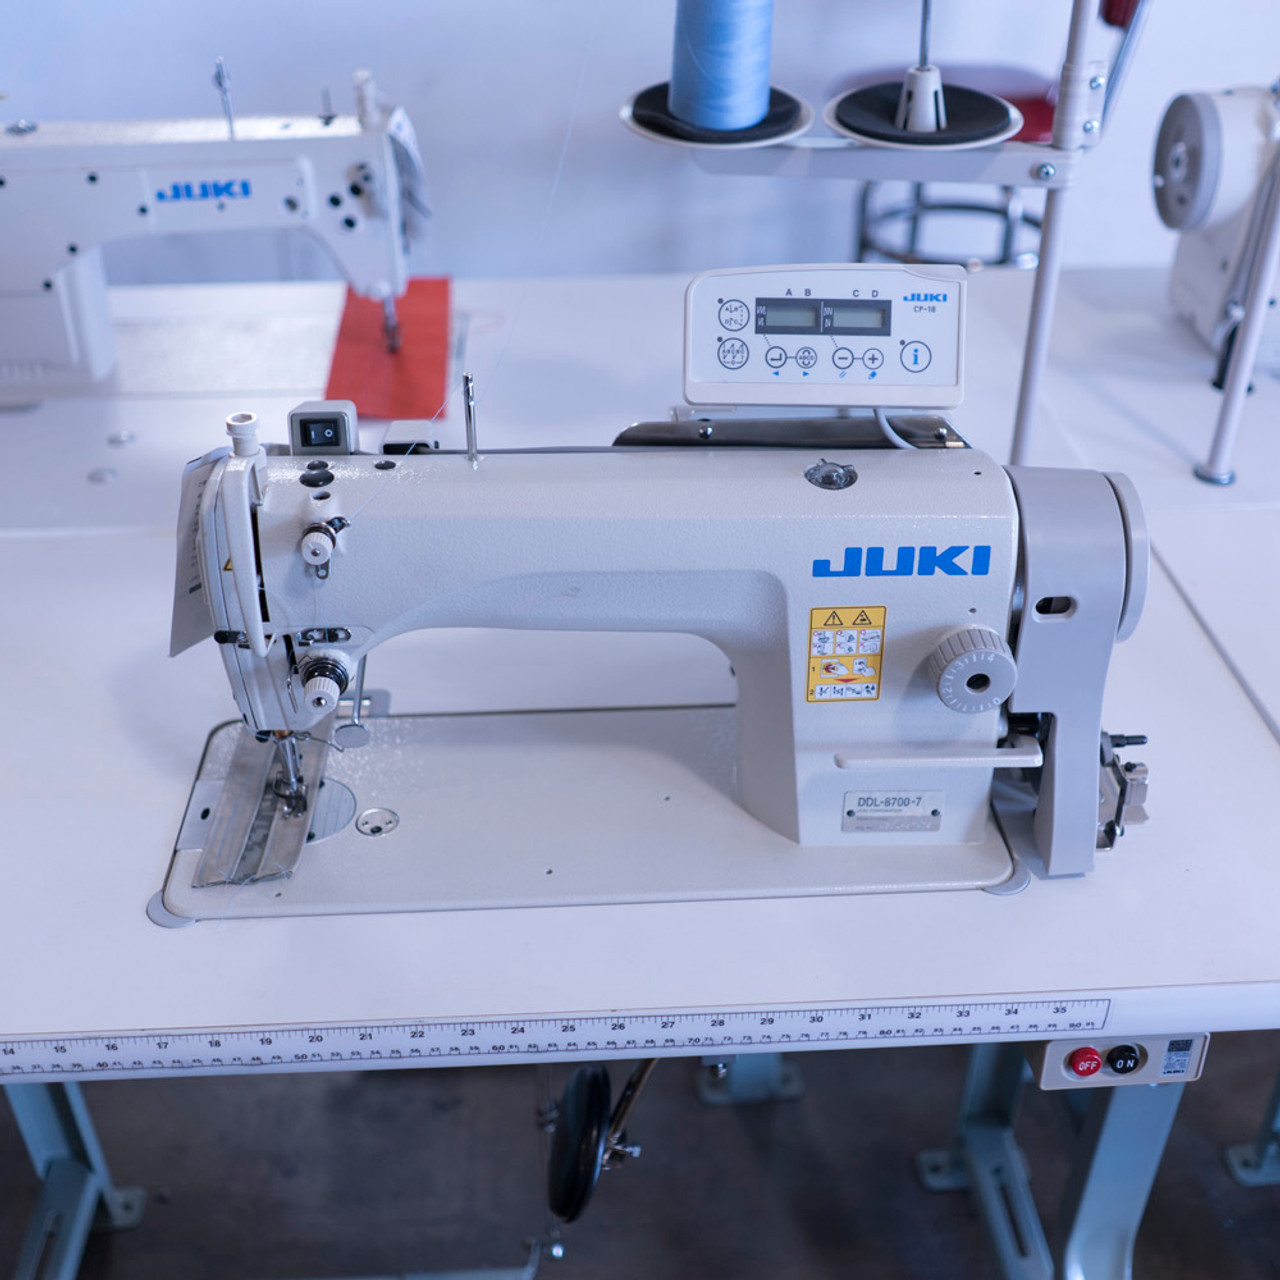 Sewing Machine Parts and Attachments For Sale or ISO